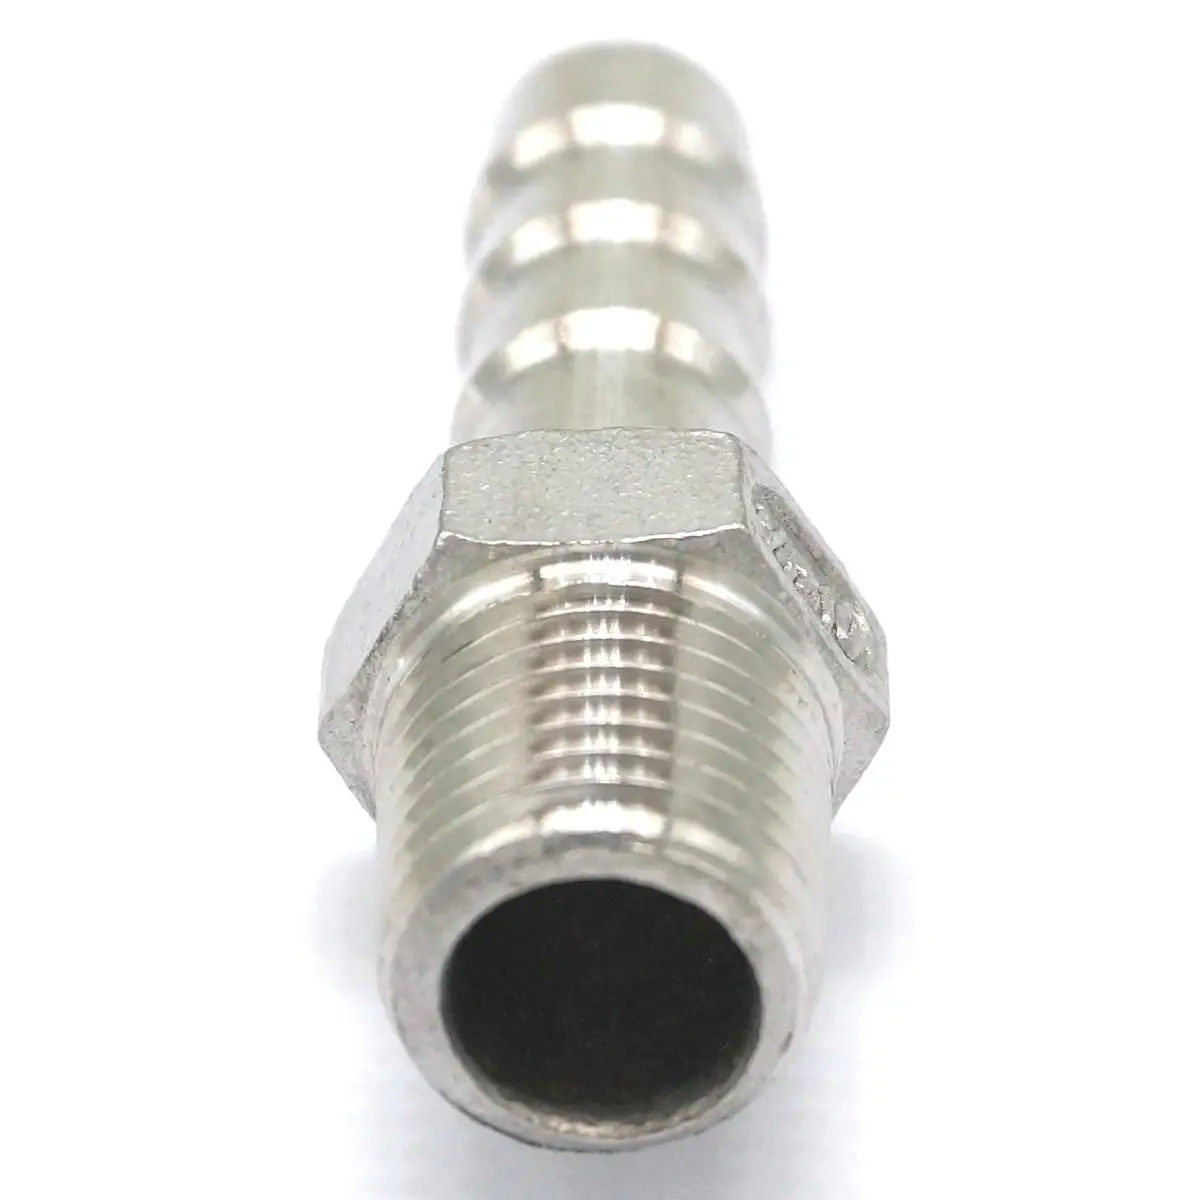 1/4" Male Thread Pipe Fitting x 6mm Barb Hose Tail Connector SUS SS 304 Steel 